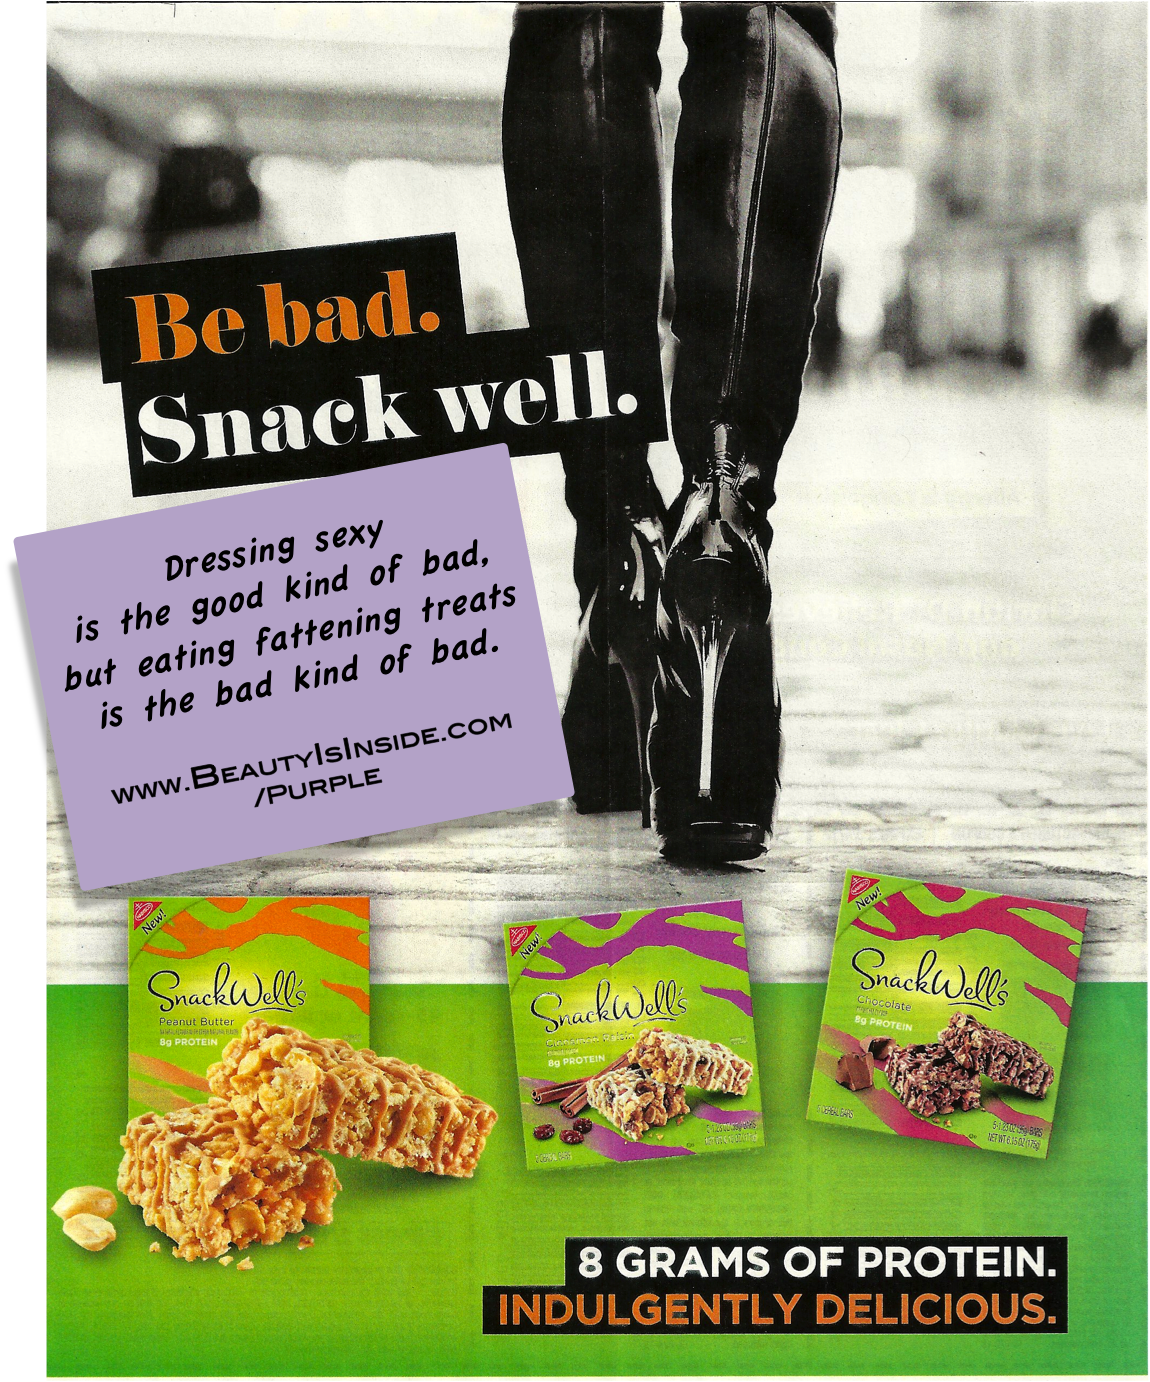 Snackwell's